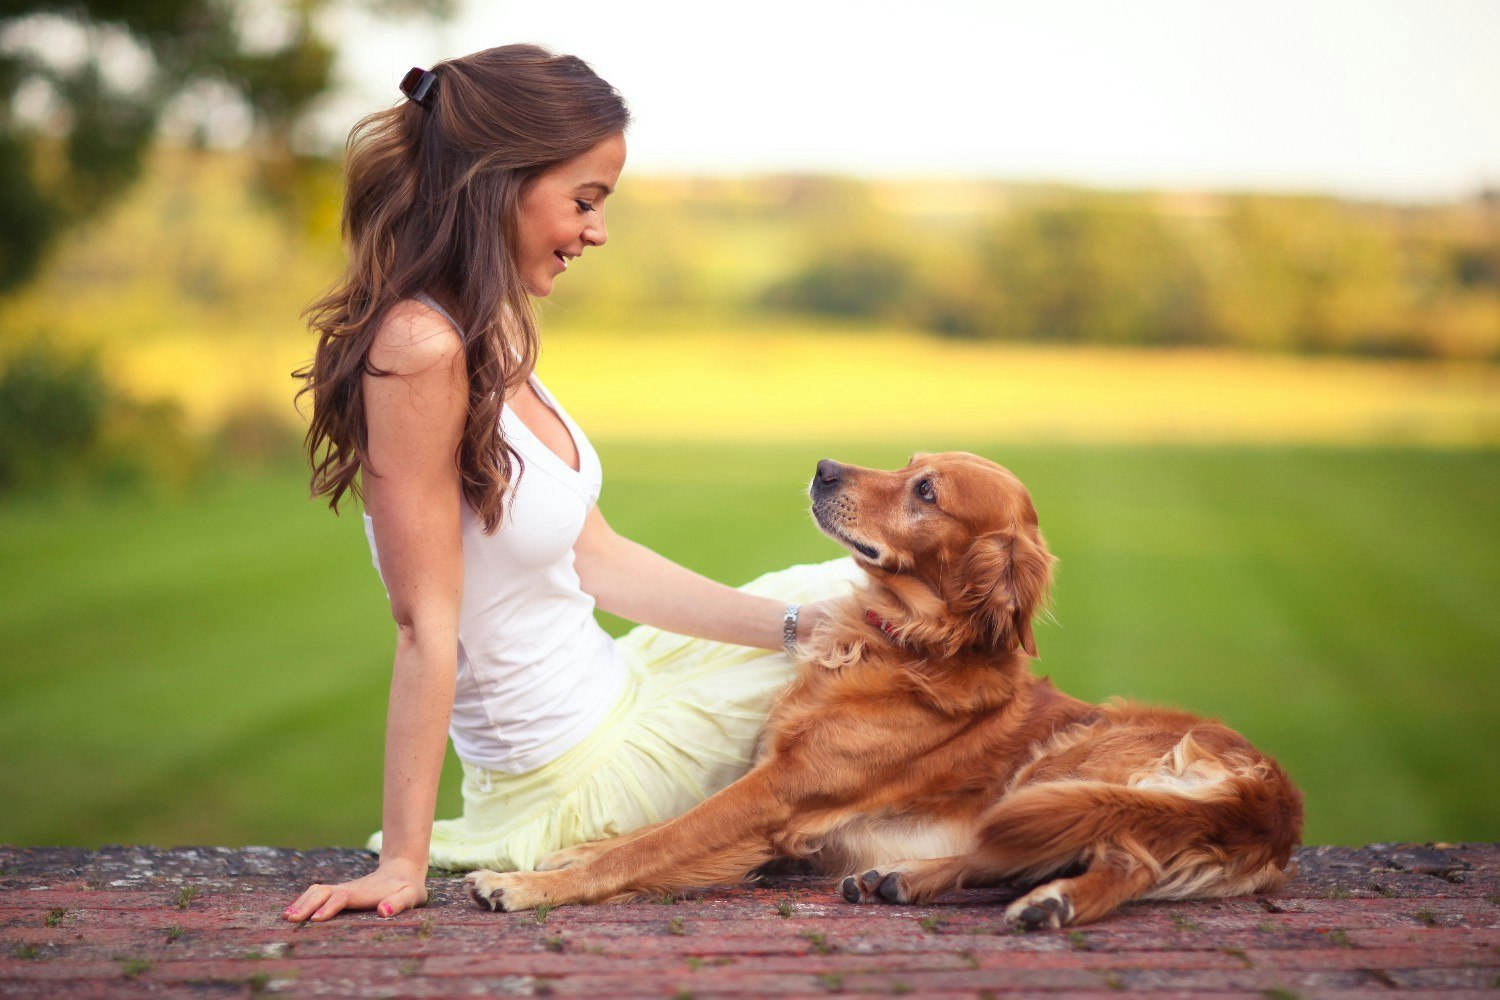 A girl in a white dress stroking a dog, both sitting on the ground